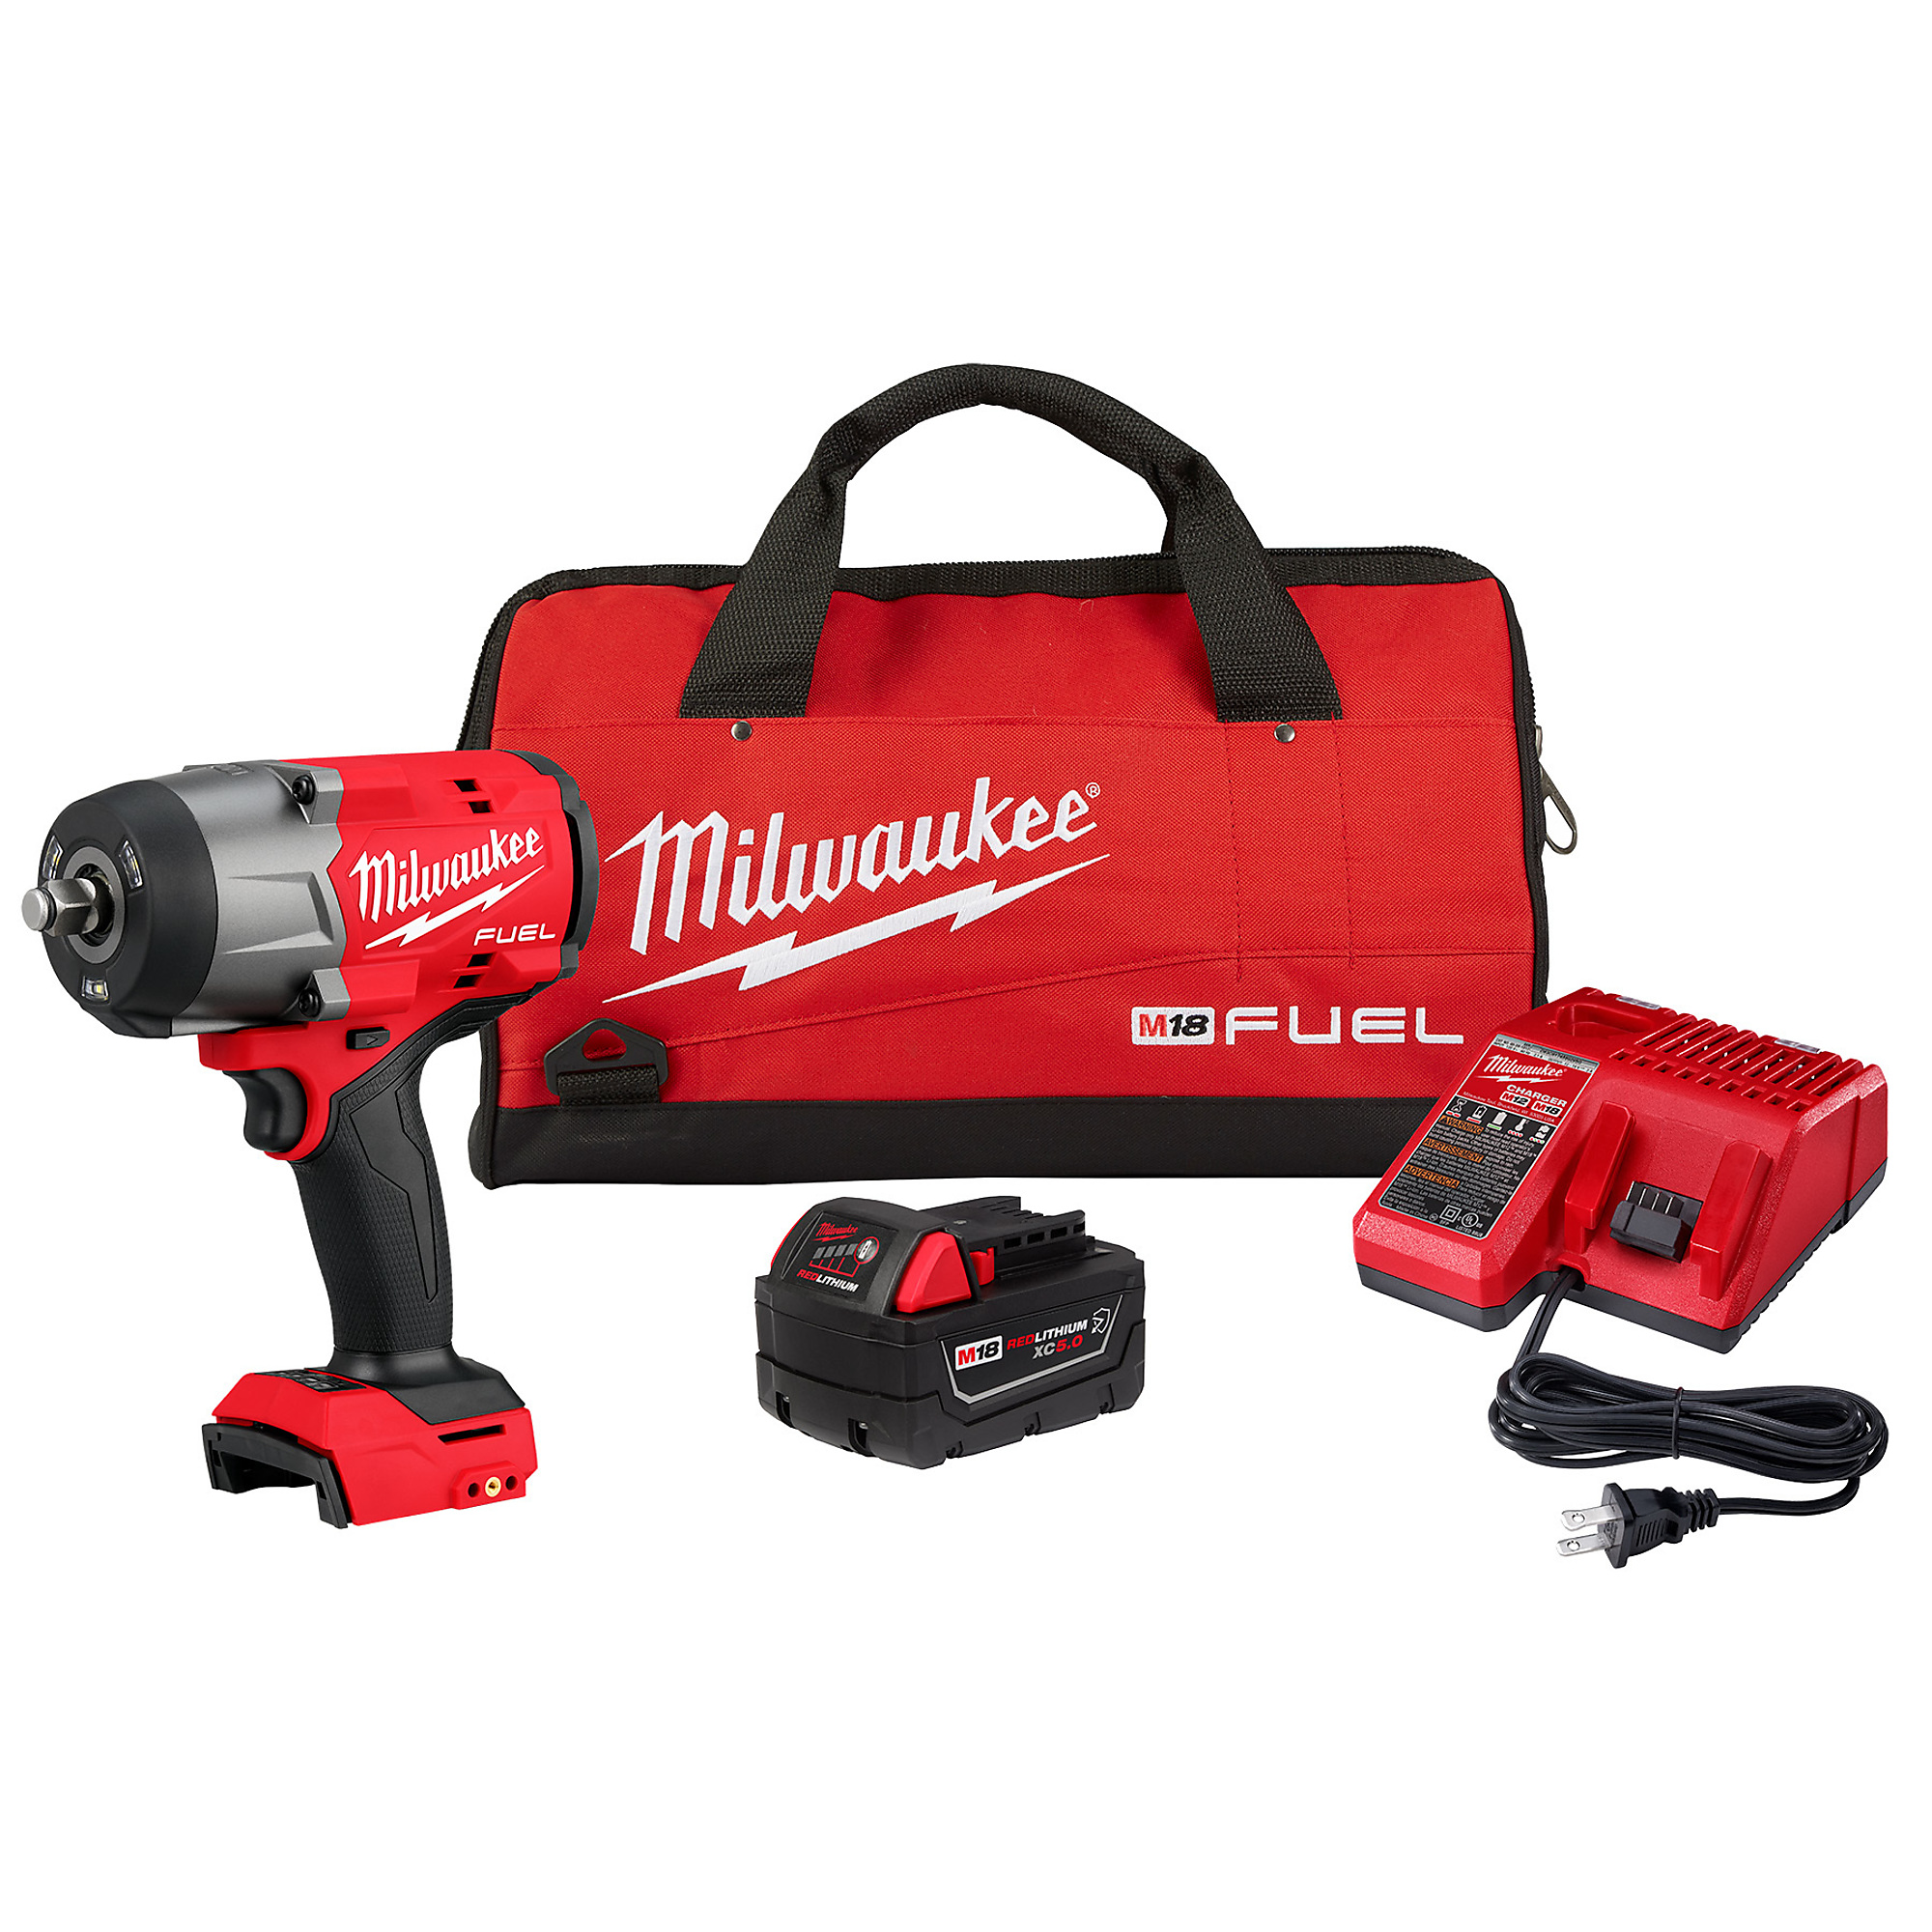 Milwaukee, M18 1/2Inch High Torque Impact Wrench FrictRingKit, Drive Size 1/2 in, Volts 18 Battery Type Lithium-ion, Model 2967-21B